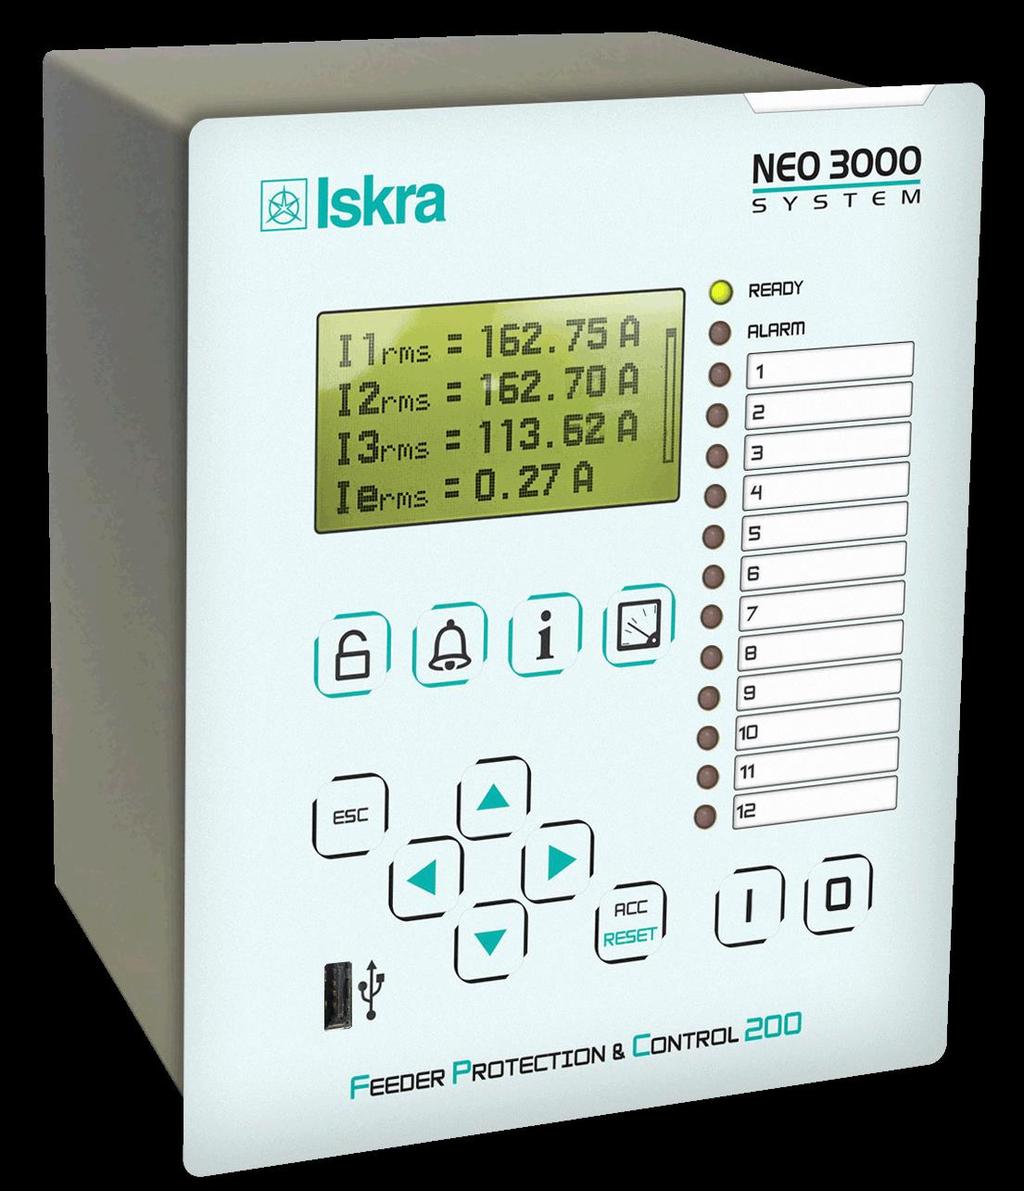 Introduction 1.1 Presentation FPC 200 is a family of current and voltage numerical protection relays with easy to use interface meant for variety of solutions in industry and power distribution.